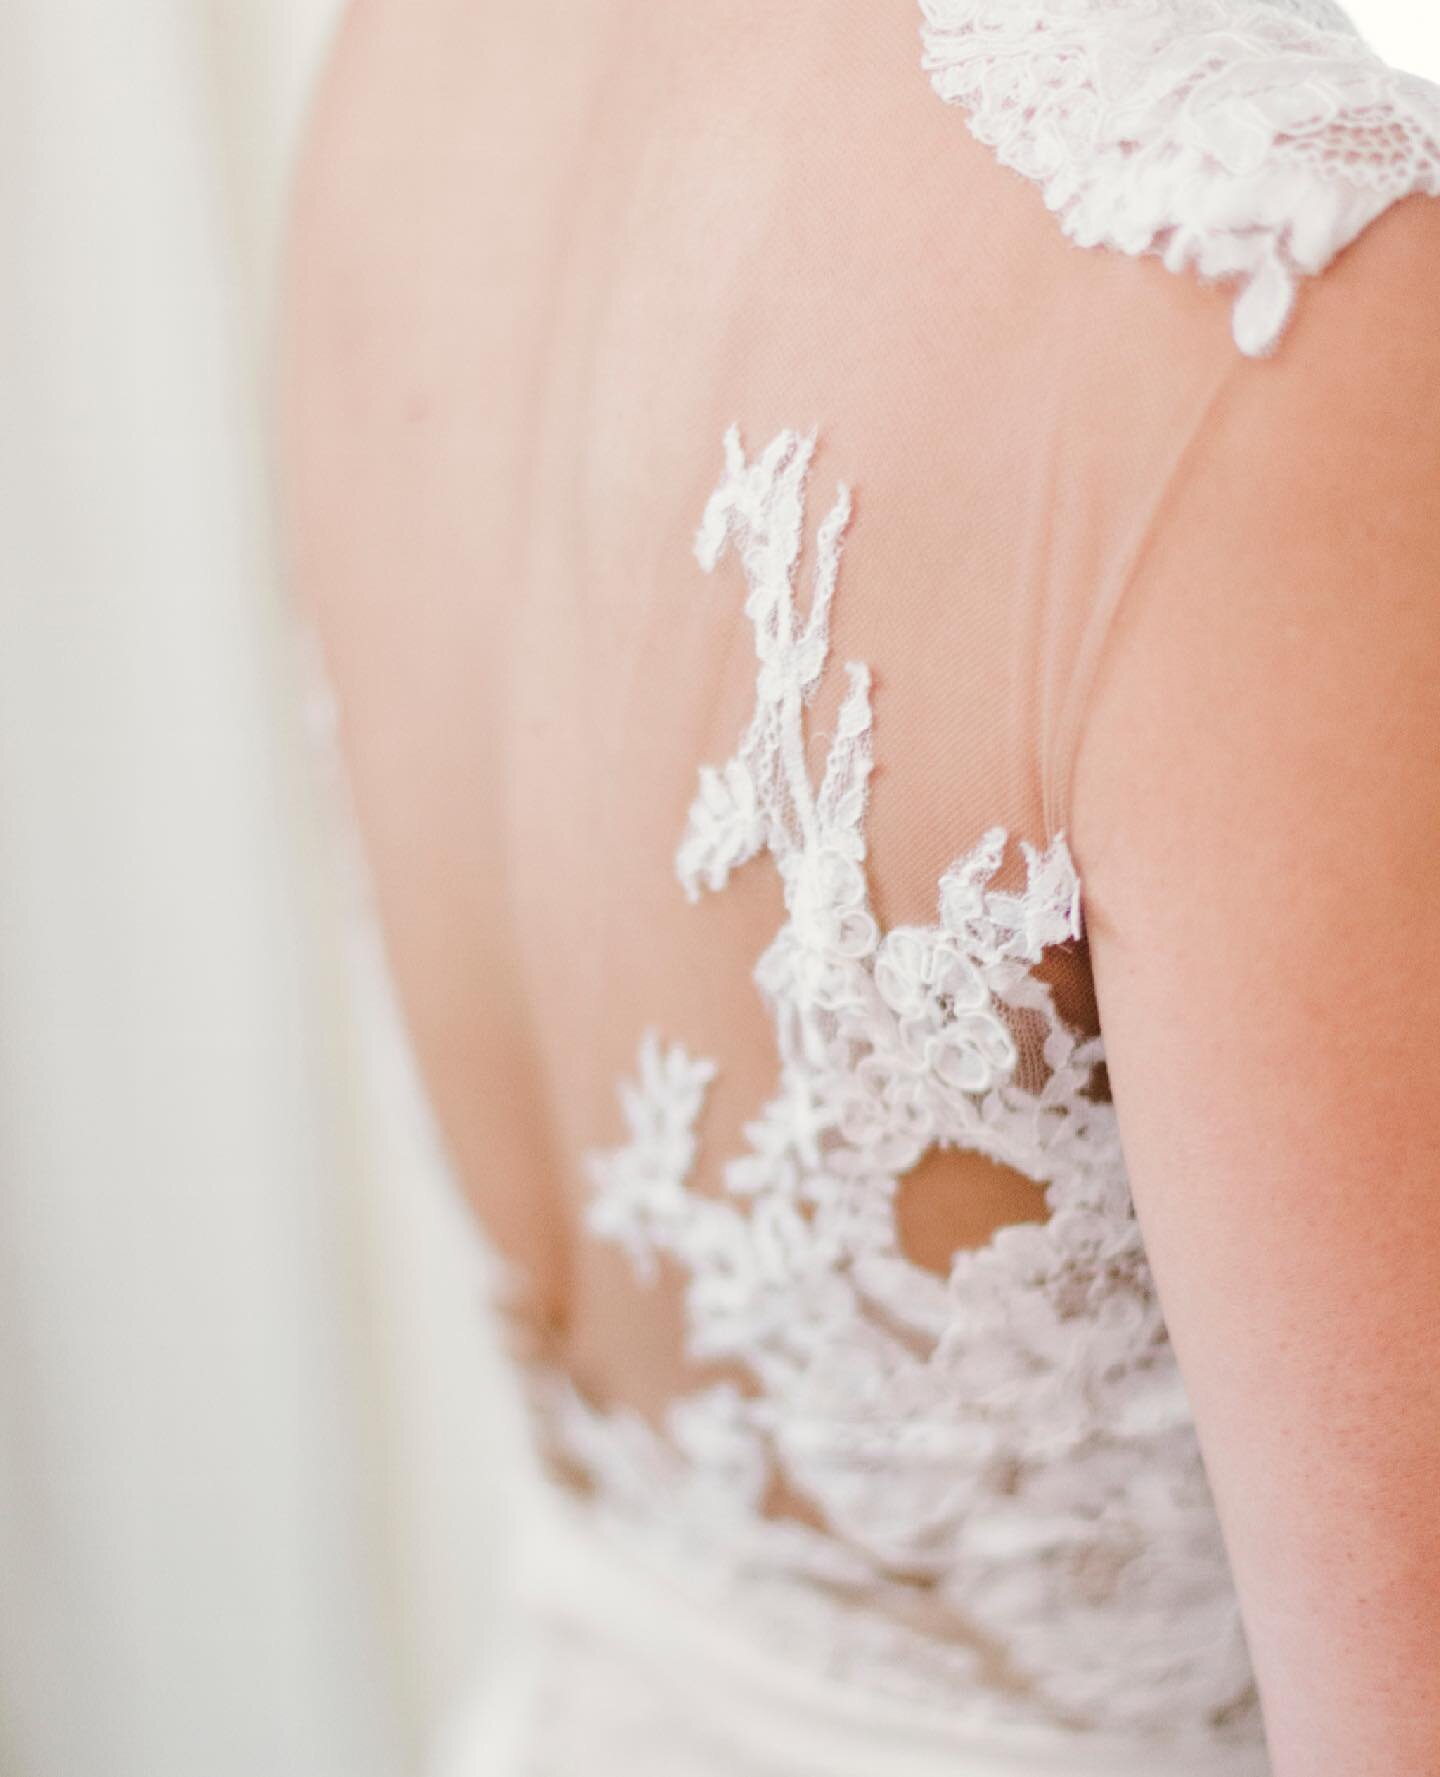 It&rsquo;s all in the details 🤍 What little &ldquo;must have&rdquo; details did you search for when choosing your wedding gown?